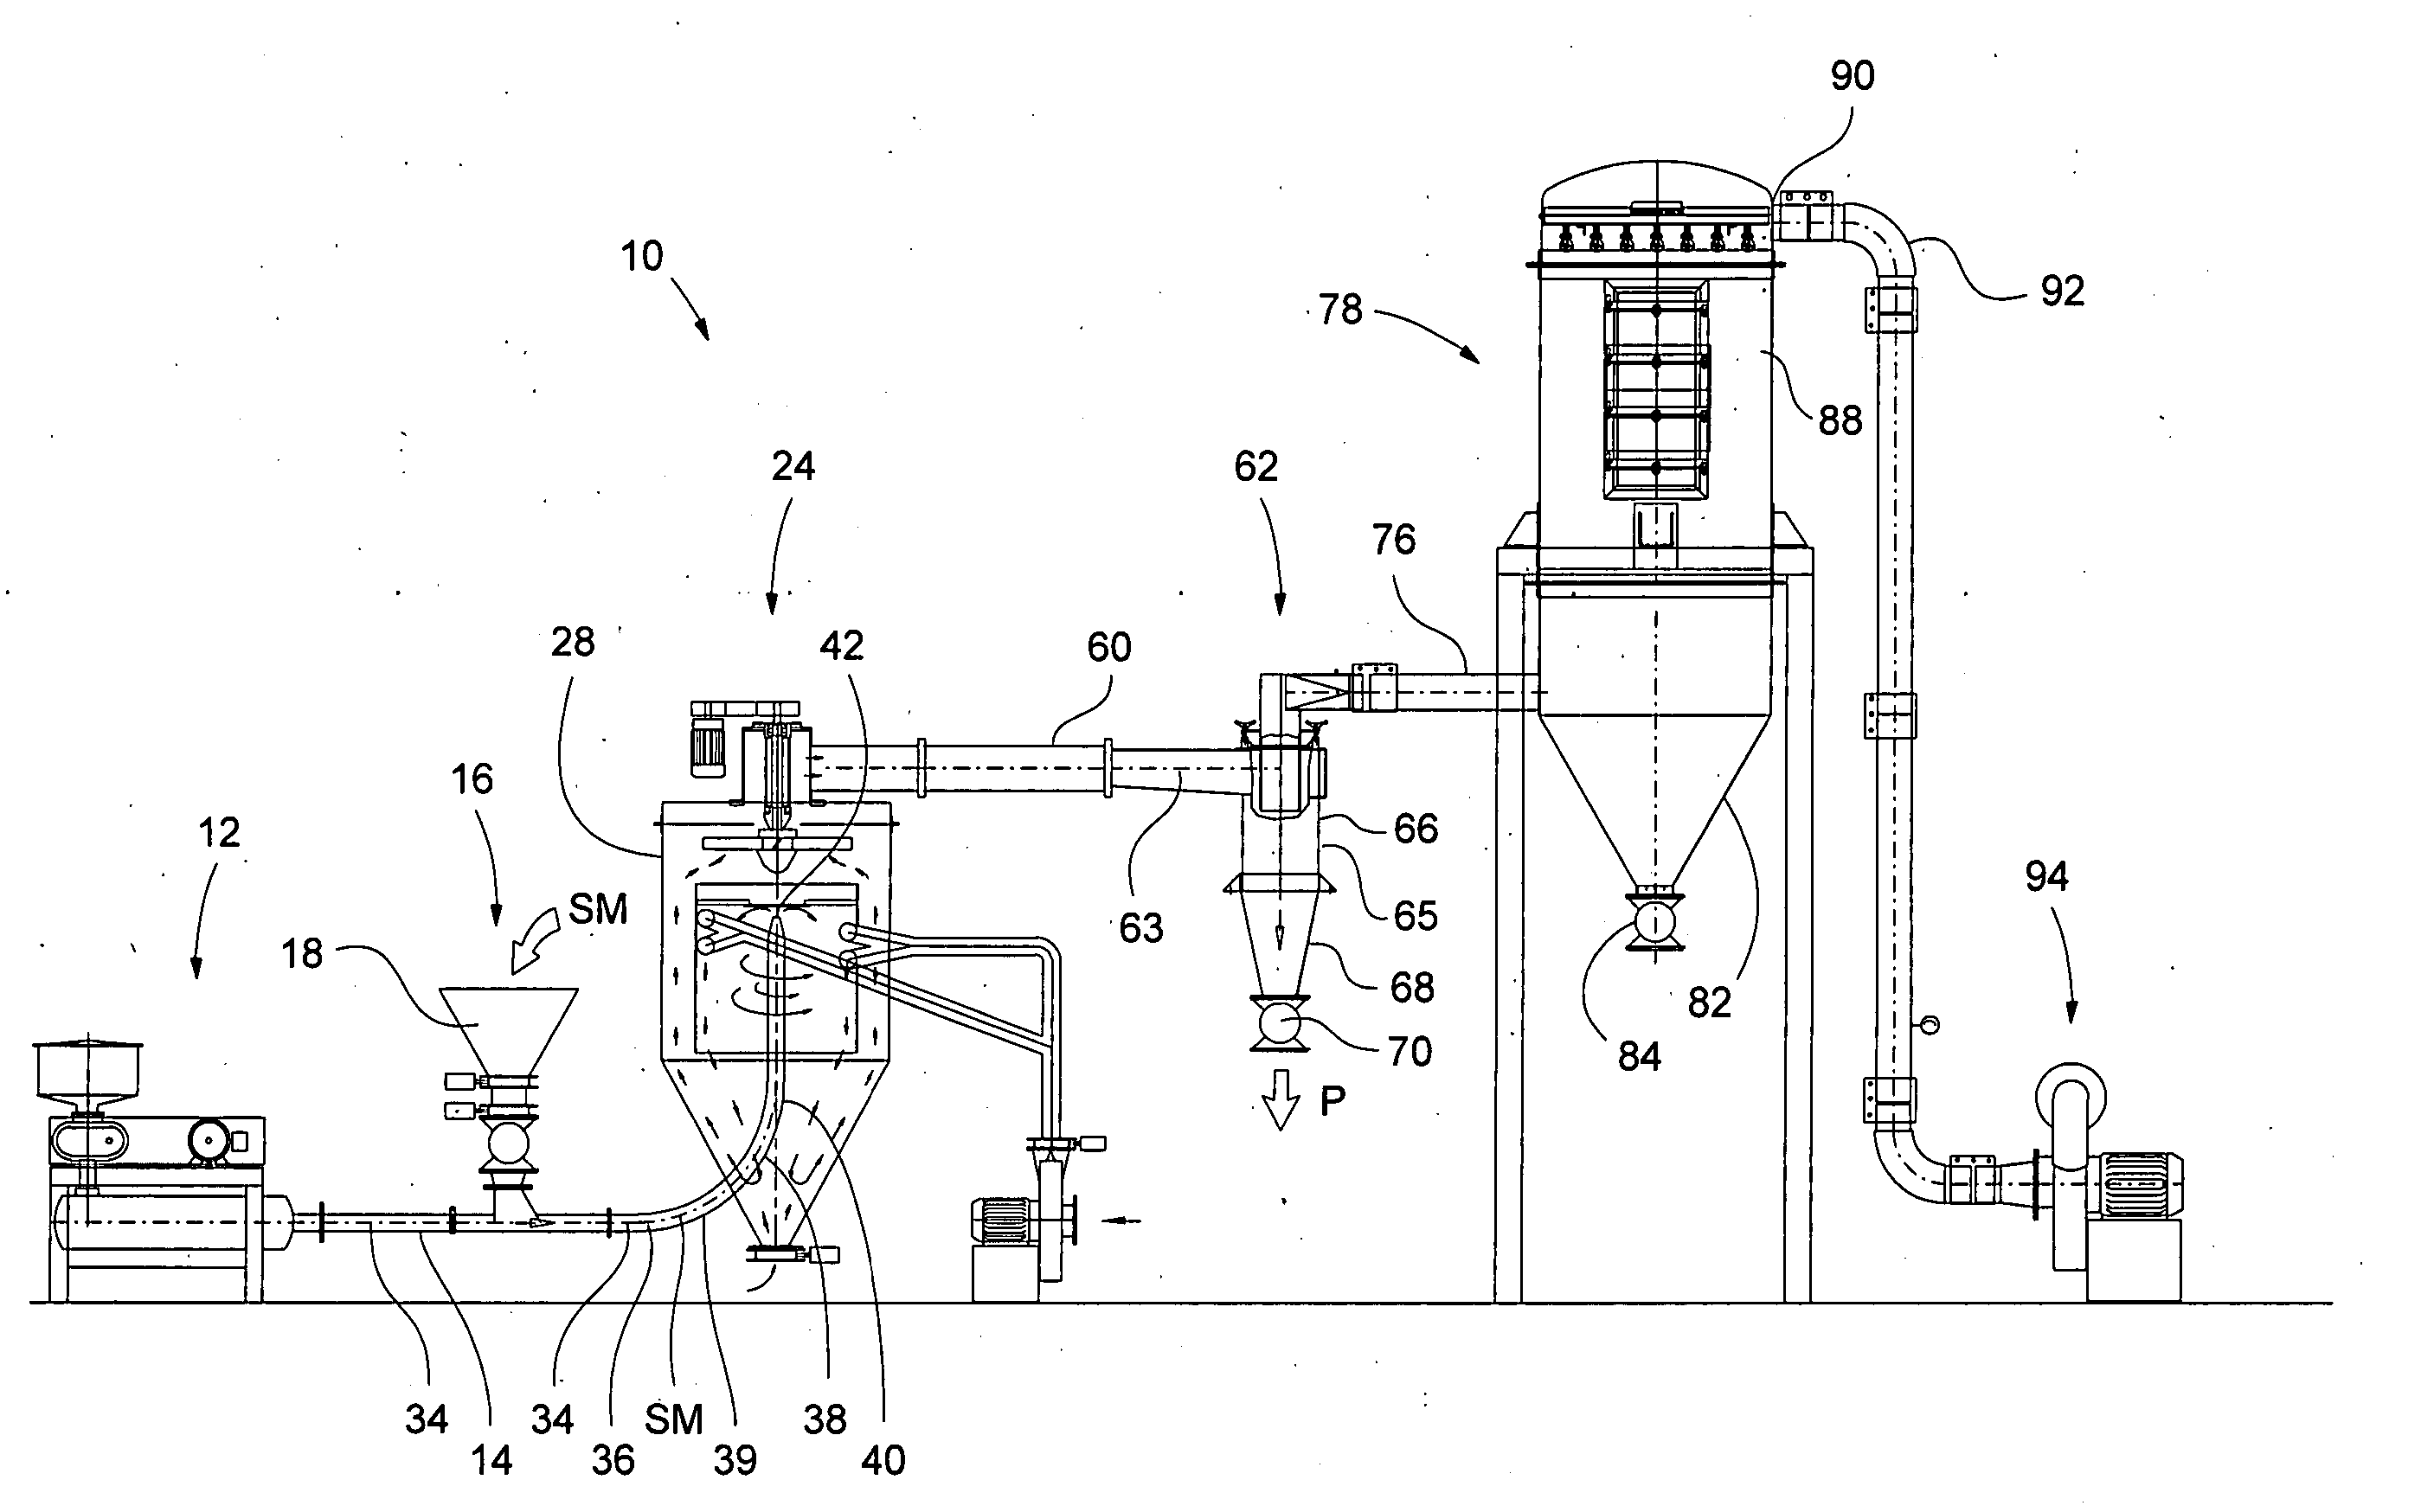 Apparatus and method for air classification and drying of particulate matter